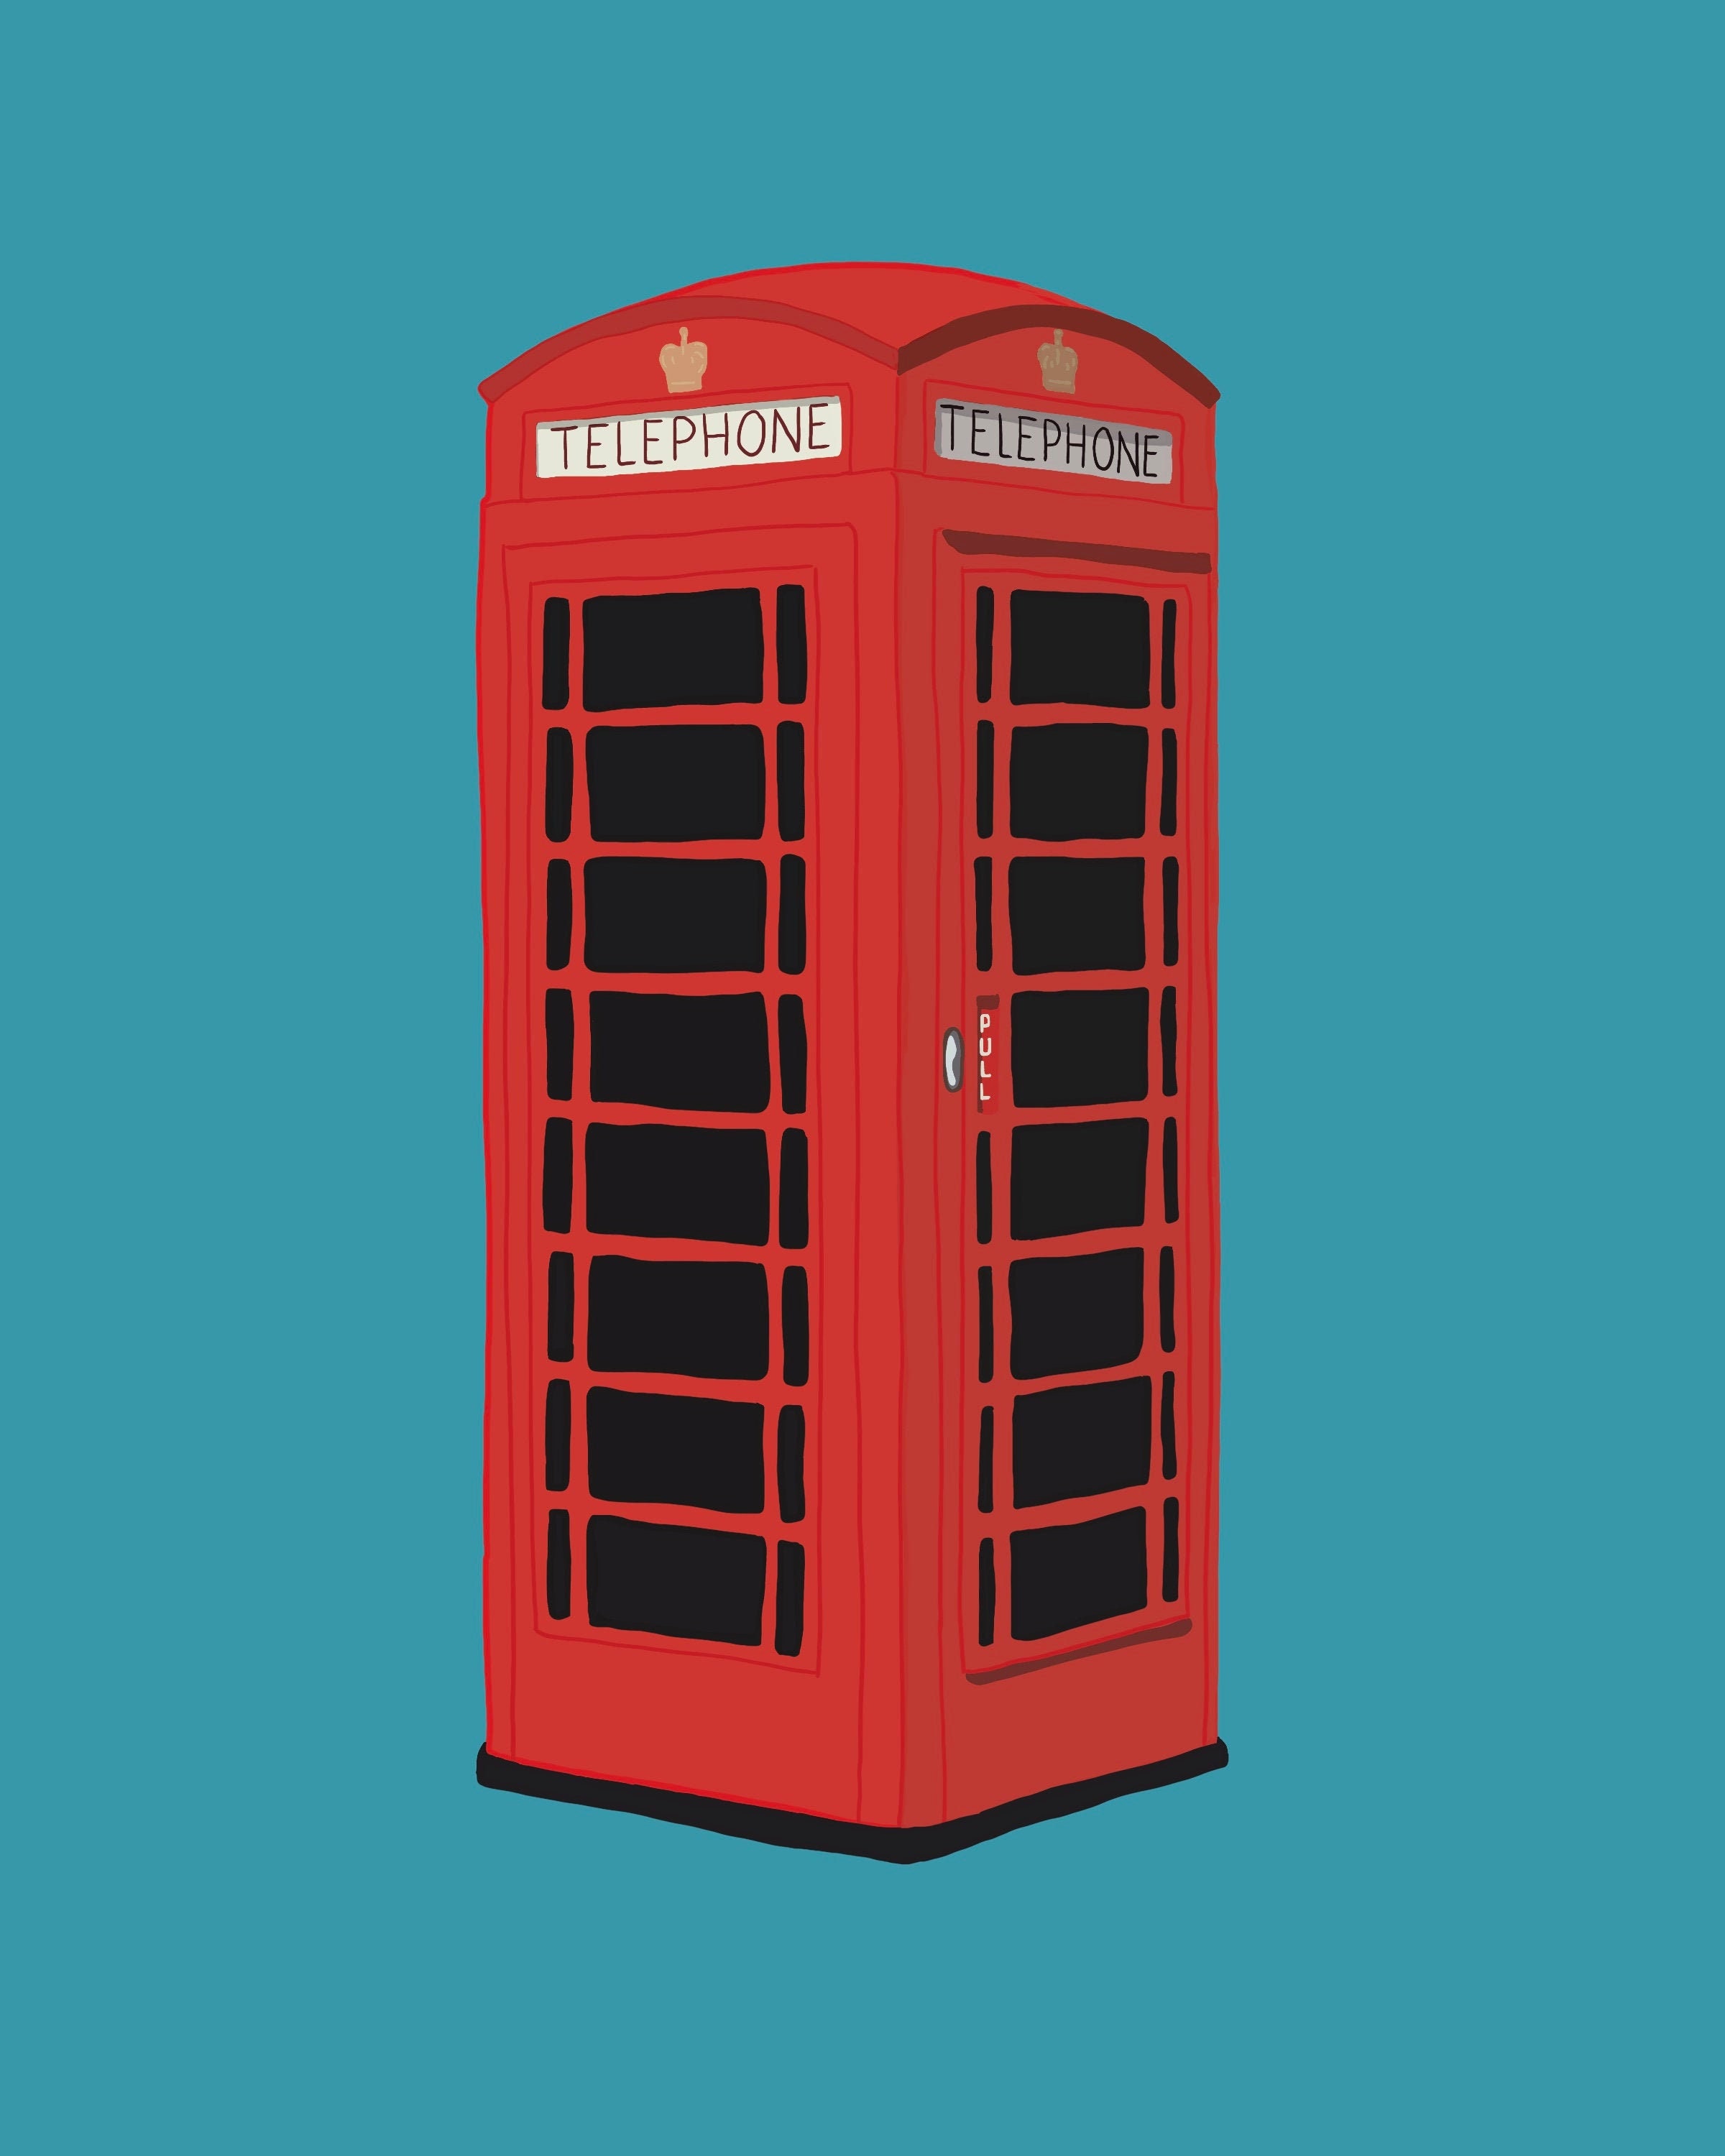 Page 7 | British Telephone Booth Images - Free Download on Freepik